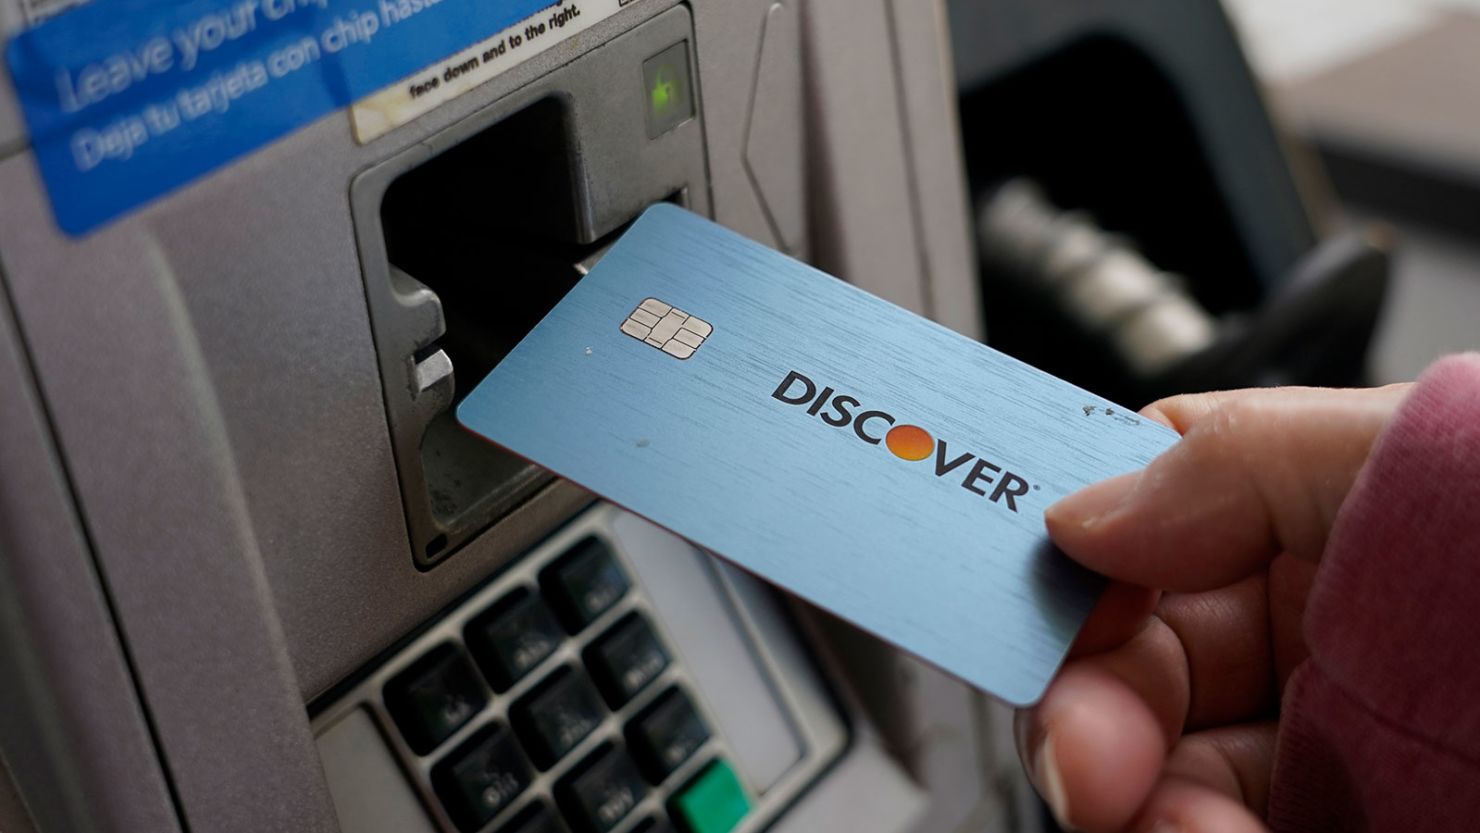 Discover's payment network is used by over 305 million cardholders.